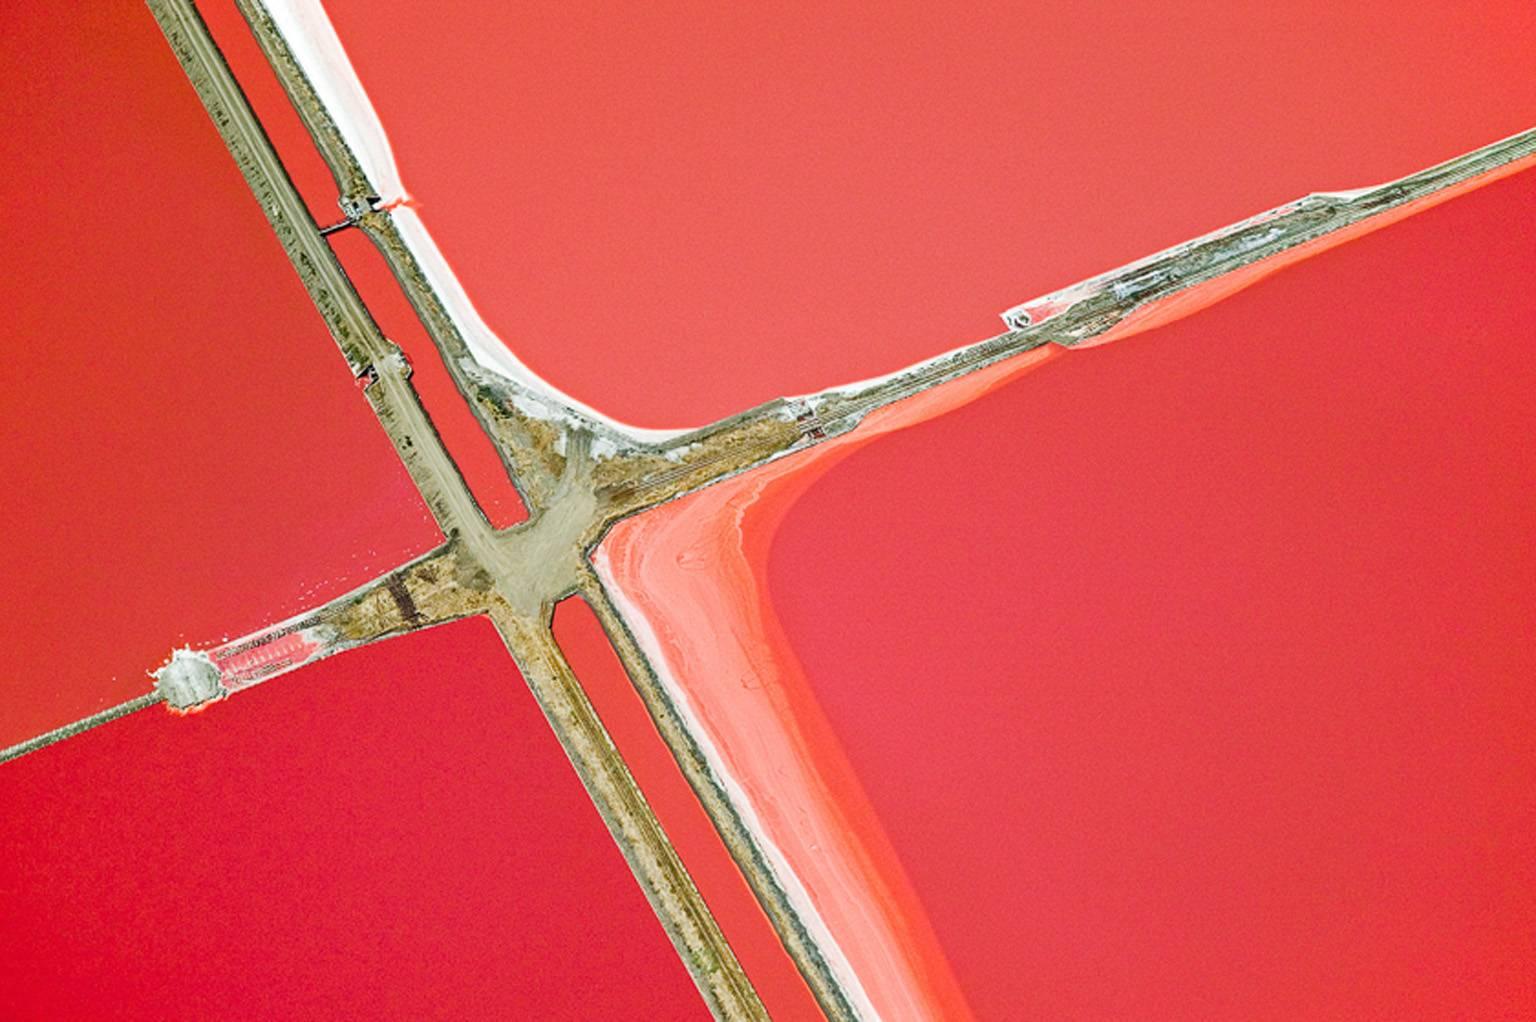 Colin McRae Abstract Photograph - Red Cross